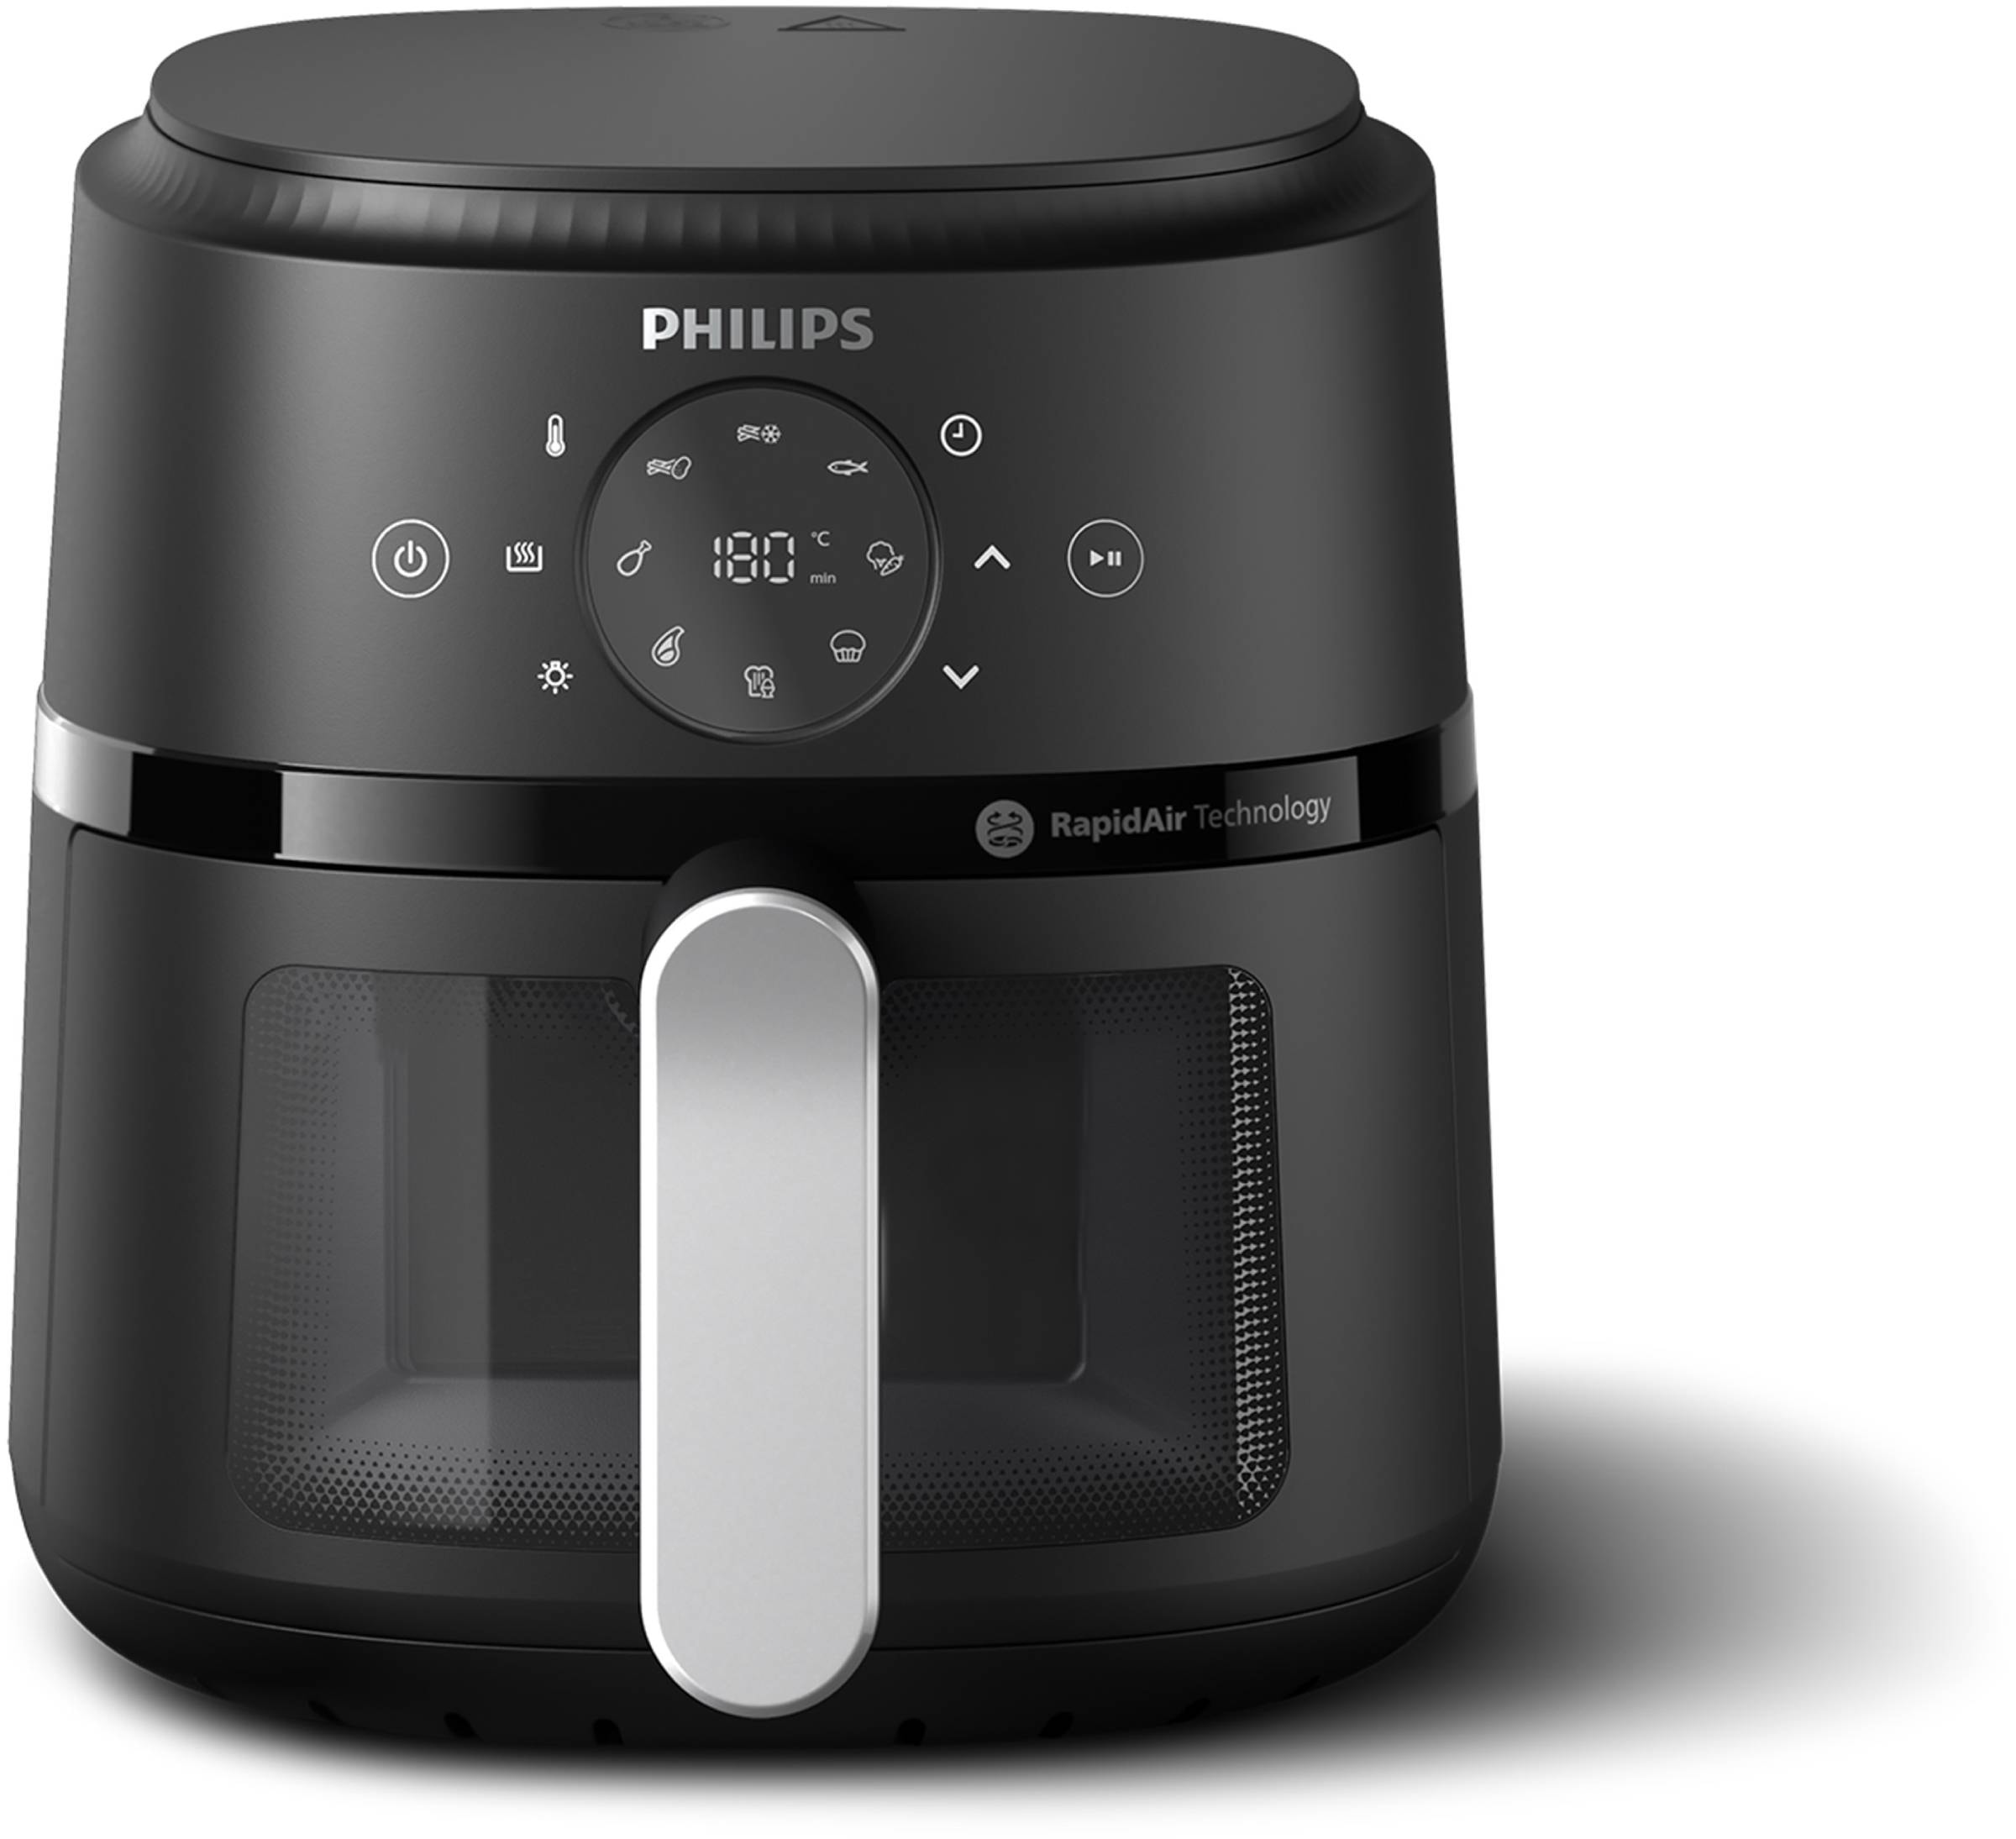 PHILIPS Friteuse à air chaud  - NA211/00